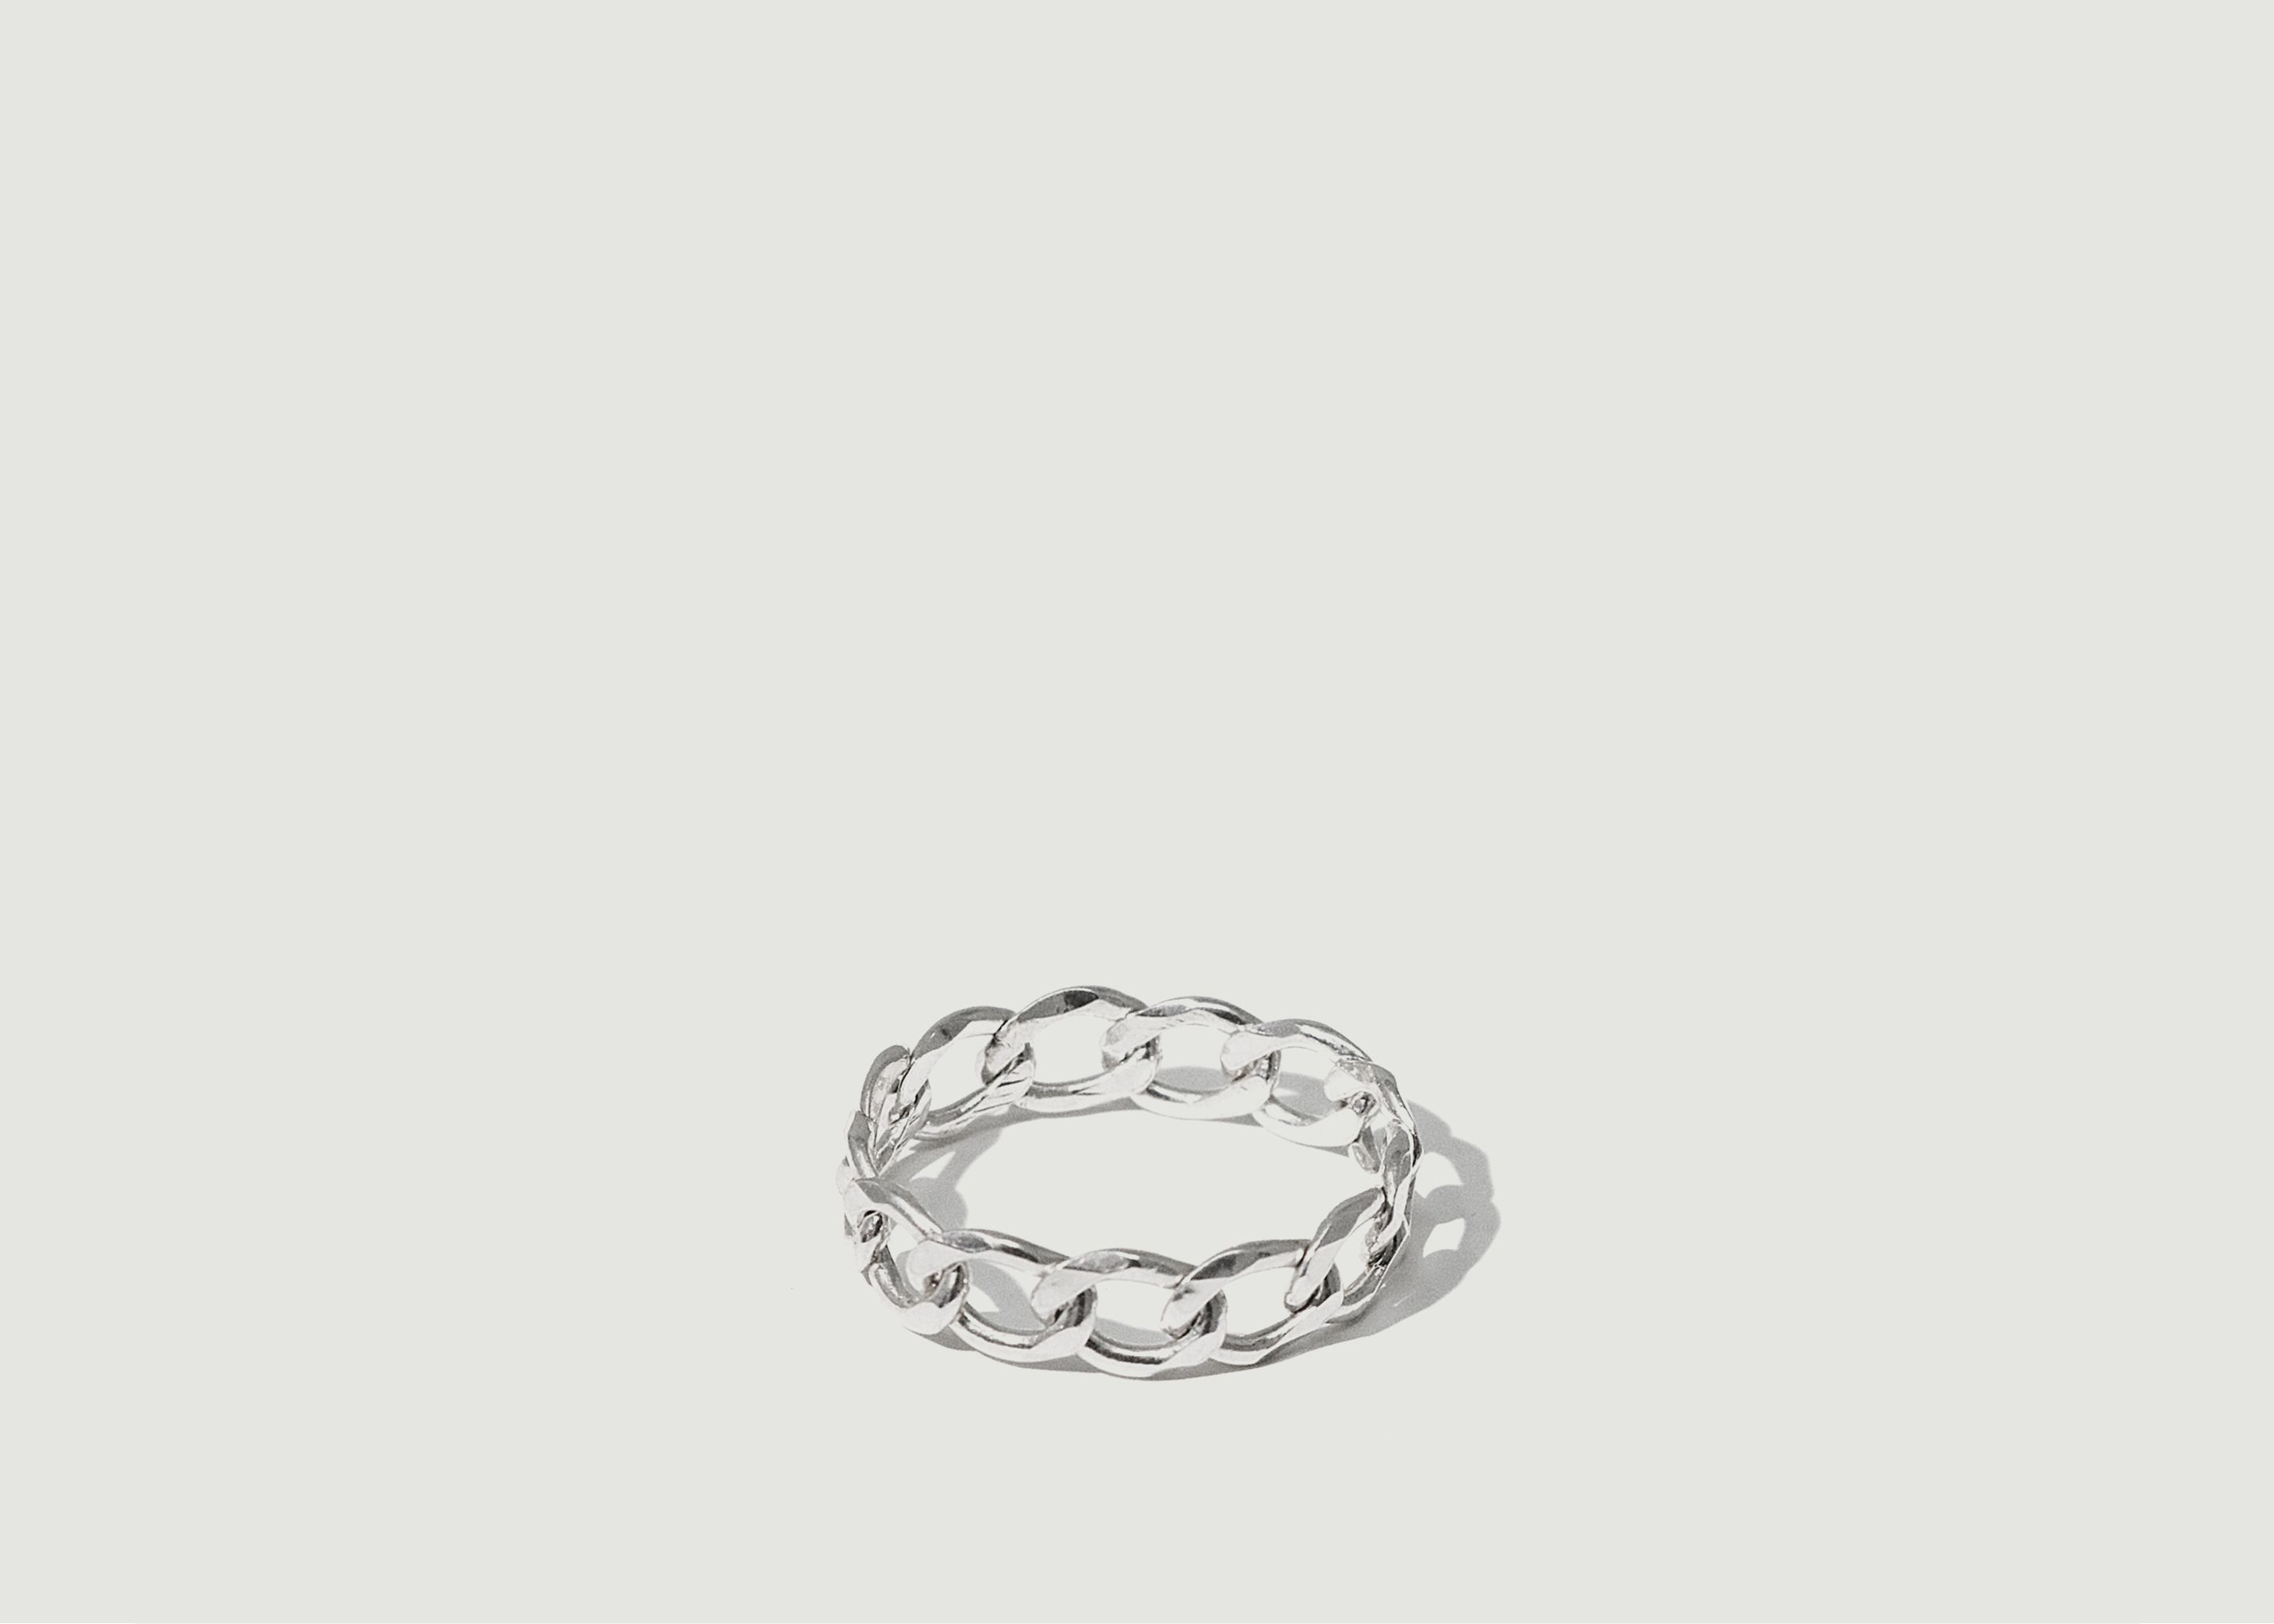 Collapsible Chain Style A Ring - CLED